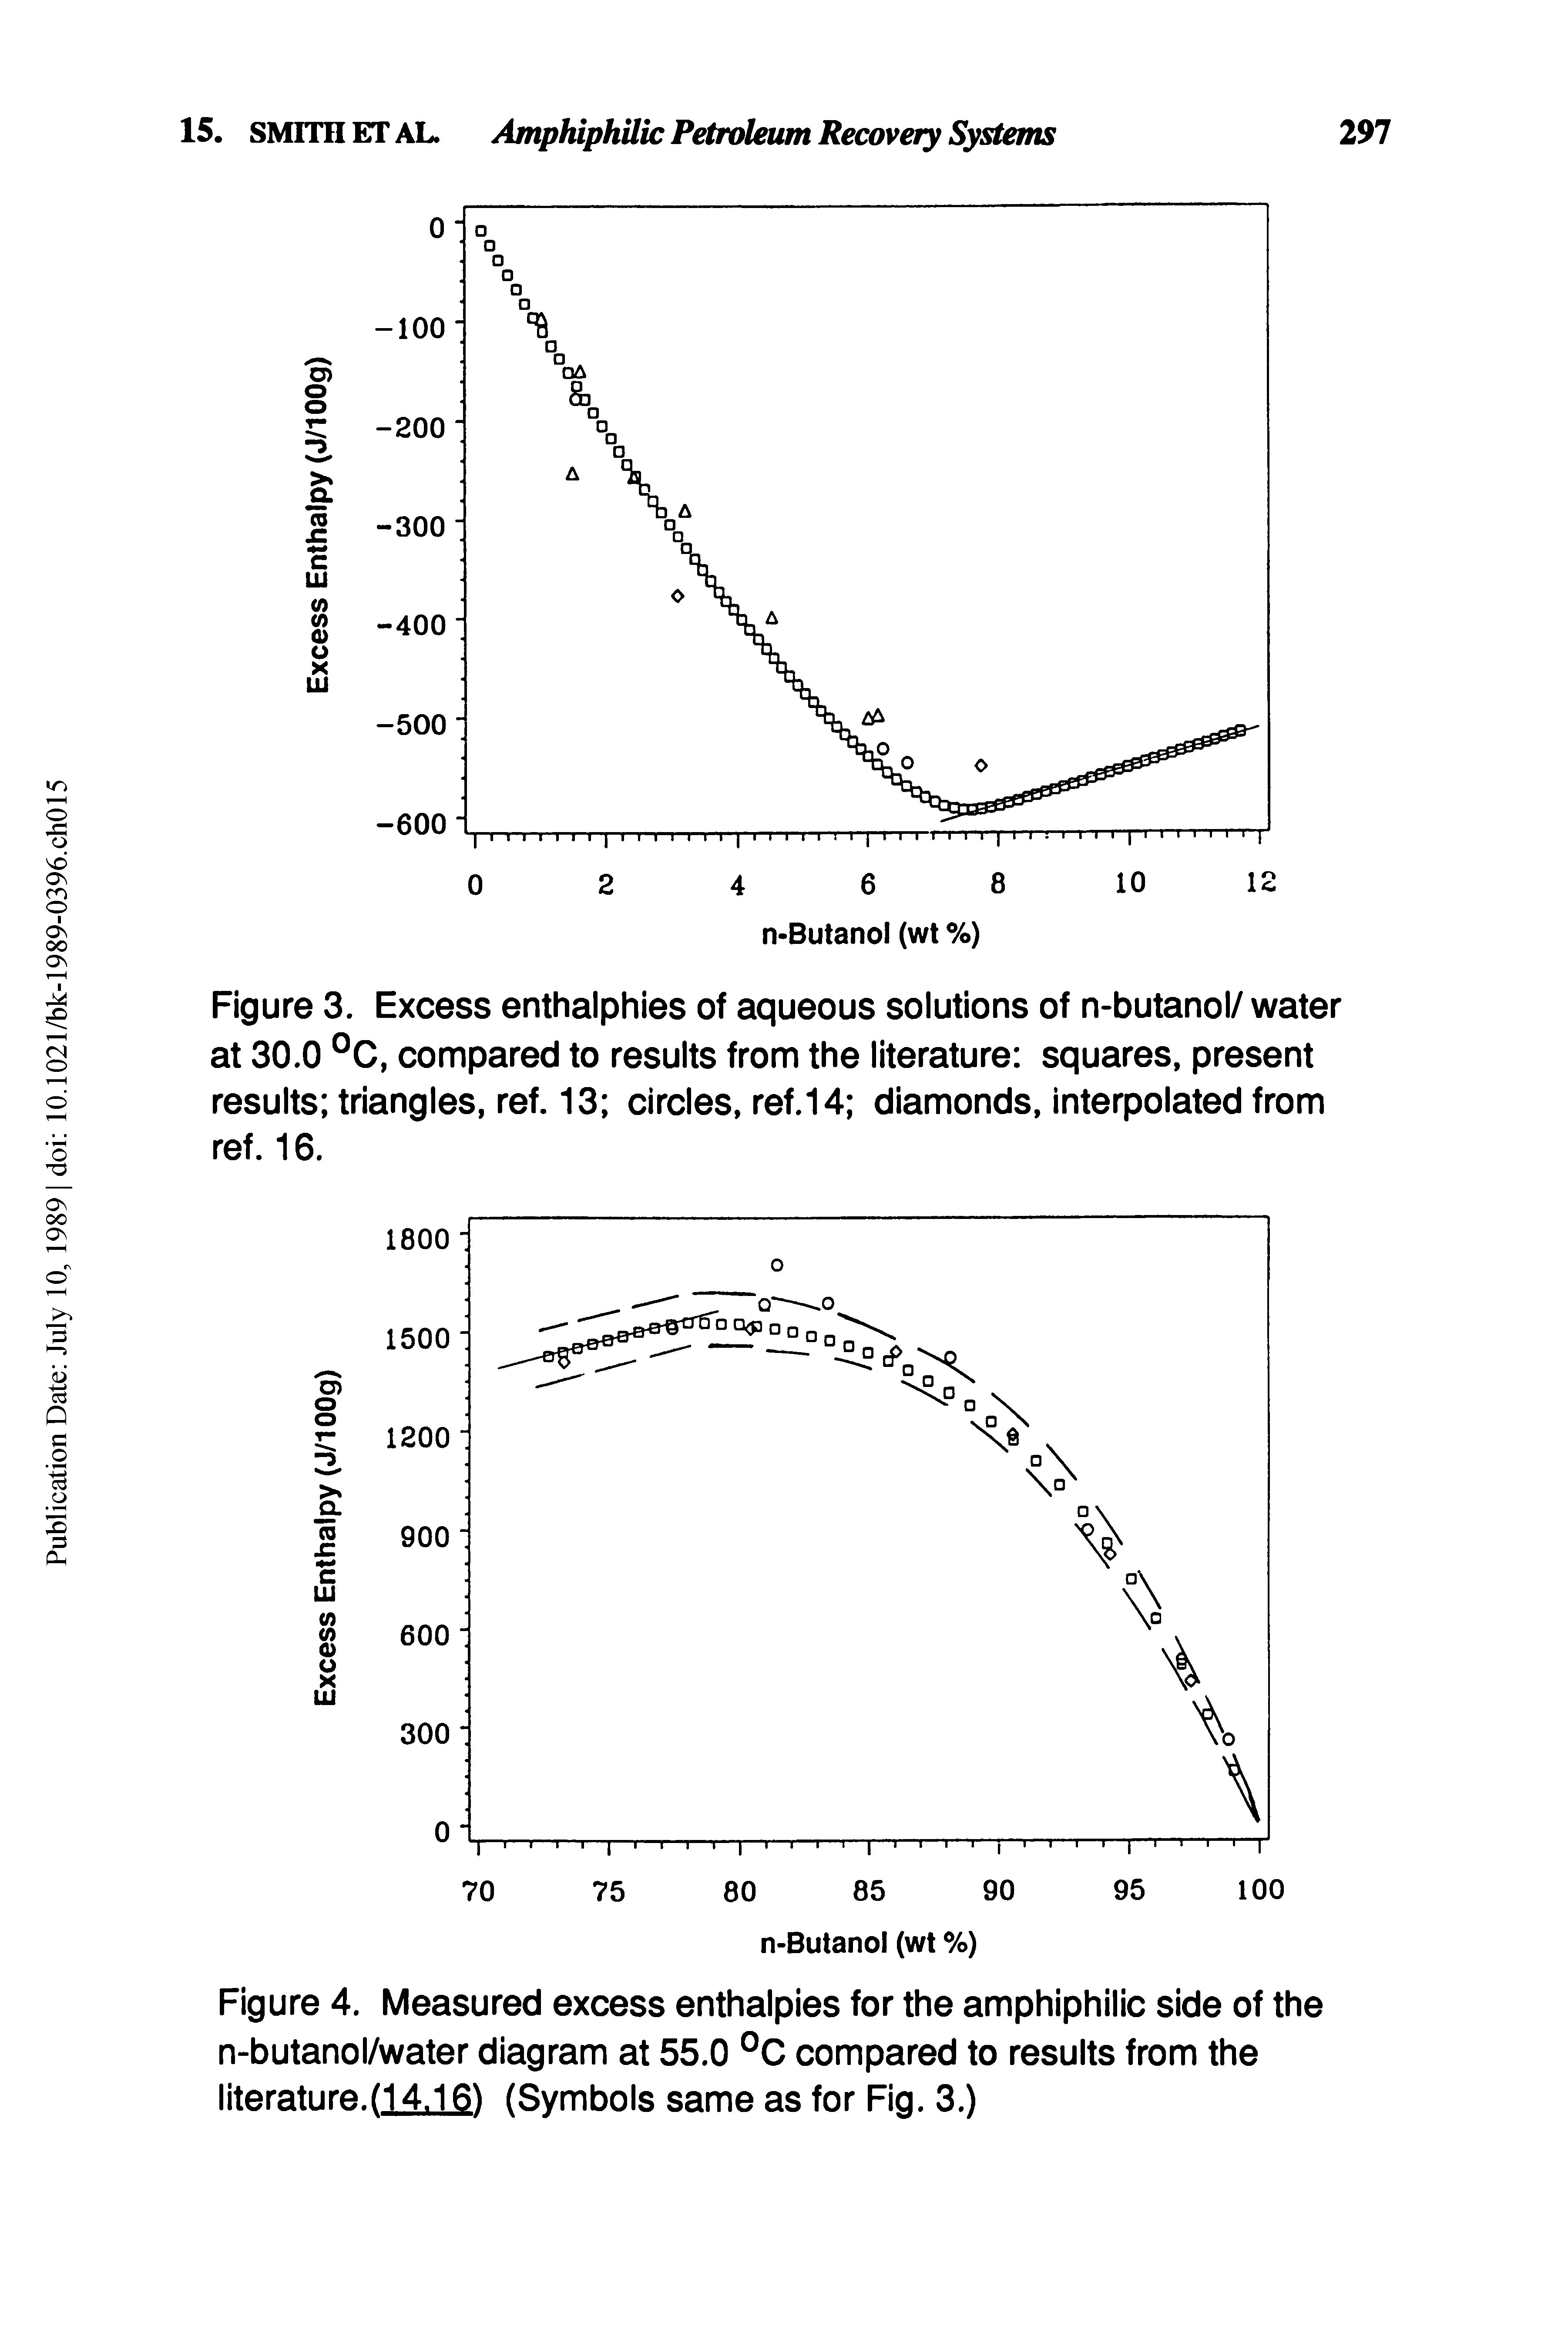 Figure 4. Measured excess enthalpies for the amphiphilic side of the n-butanol/water diagram at 55.0 °C compared to results from the literature.(14,16) (Symbols same as for Fig. 3.)...